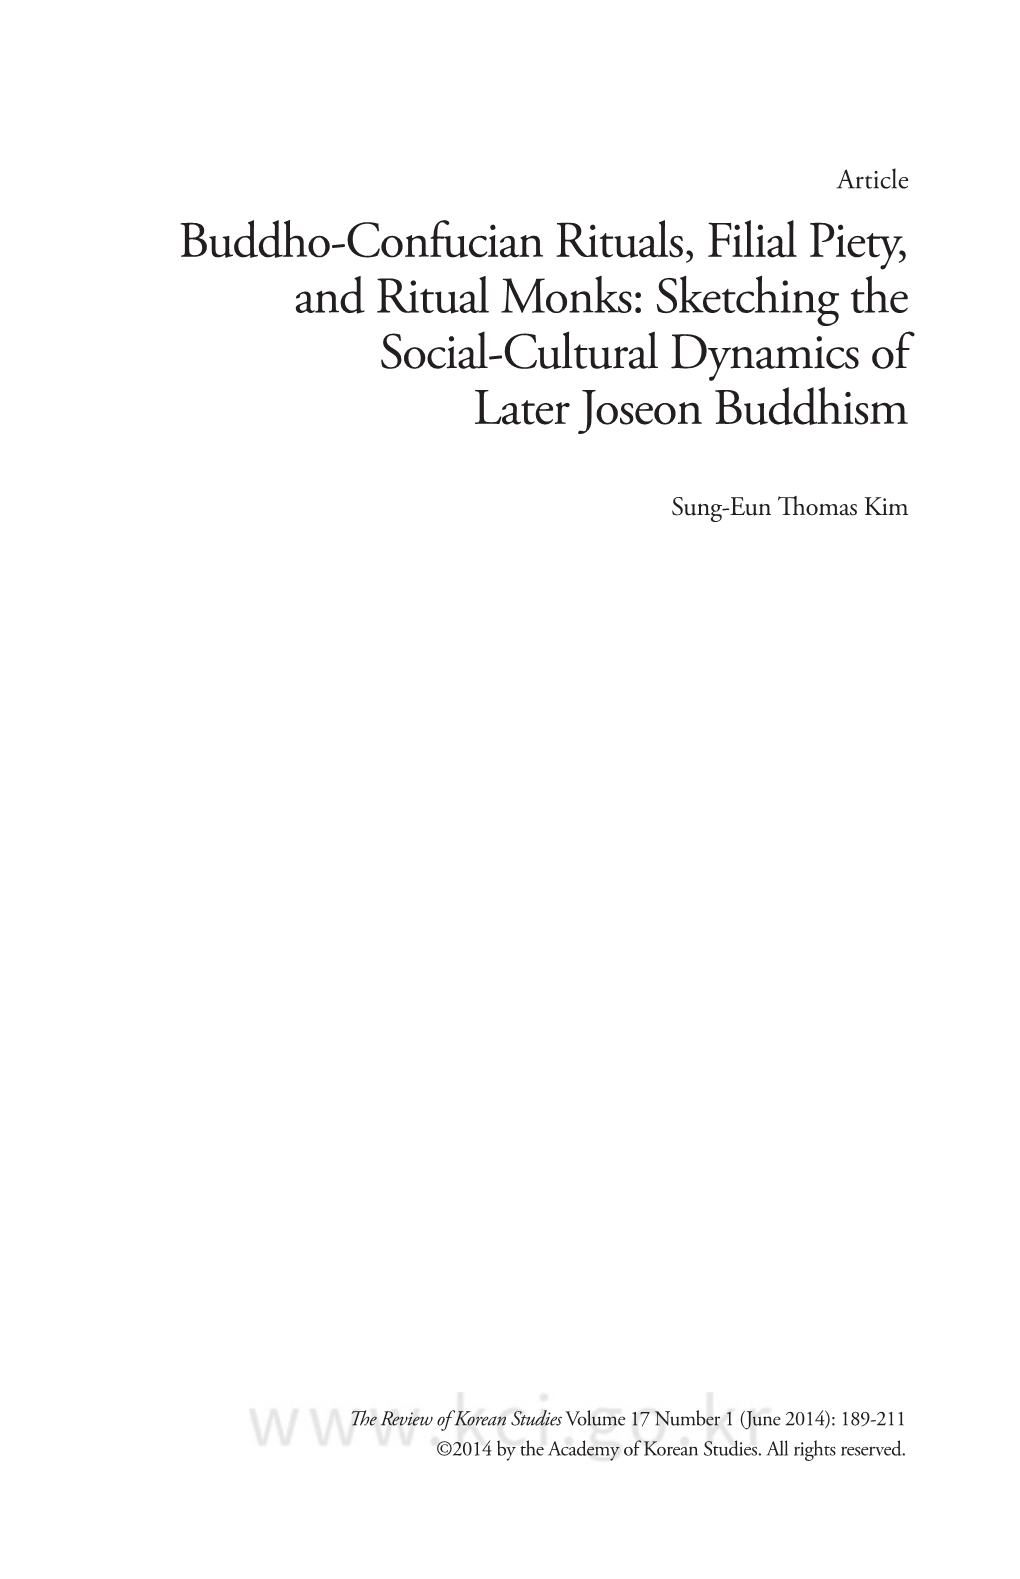 Buddho-Confucian Rituals, Filial Piety, and Ritual Monks: Sketching the Social-Cultural Dynamics of Later Joseon Buddhism